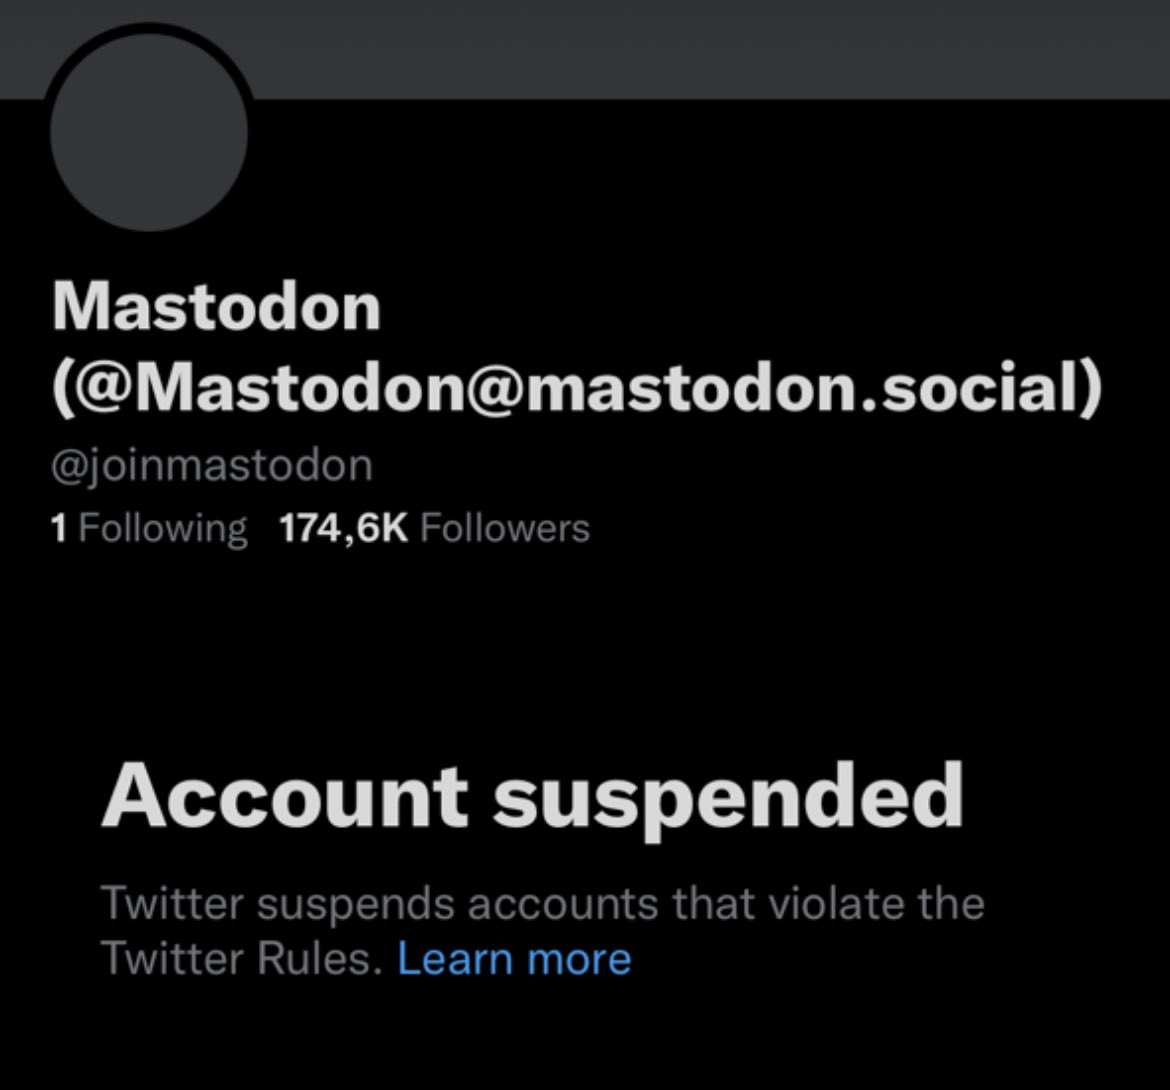 So over on #Mastodon we’re talking about how Elmo keeps suspending accounts on the left … 

Aaron Ruper and Mastodon are the two latest victims.
#mastodonmigration #MastodonSocial 
#LeaveTwitter